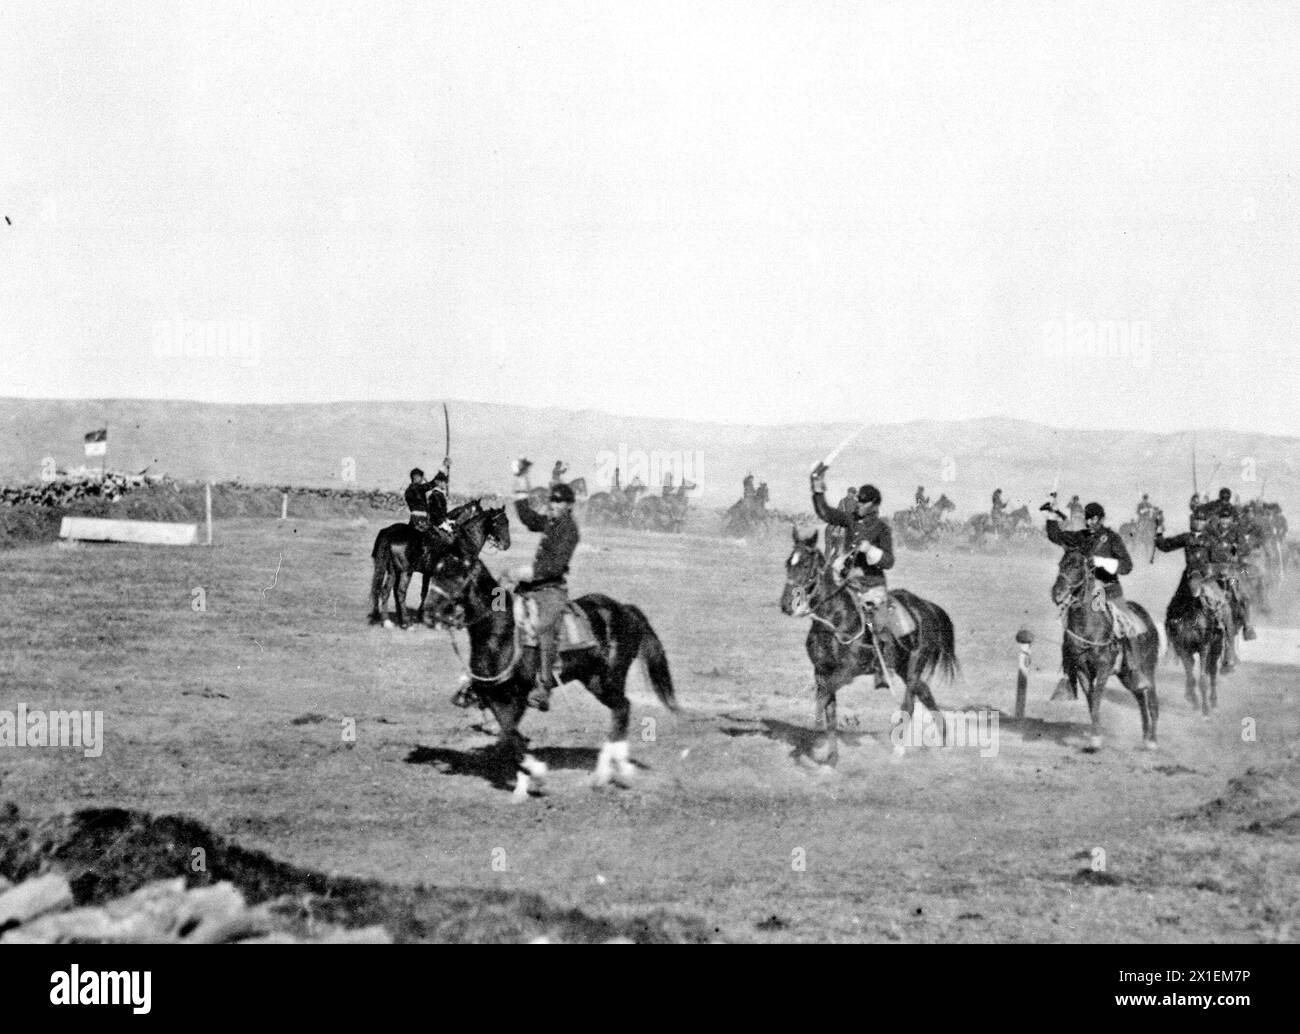 Saber Exercises, Troop 'List Cavalry, Ft. Custer Mont., 1892.' An Indian troop of U.S. soldiers Stock Photo